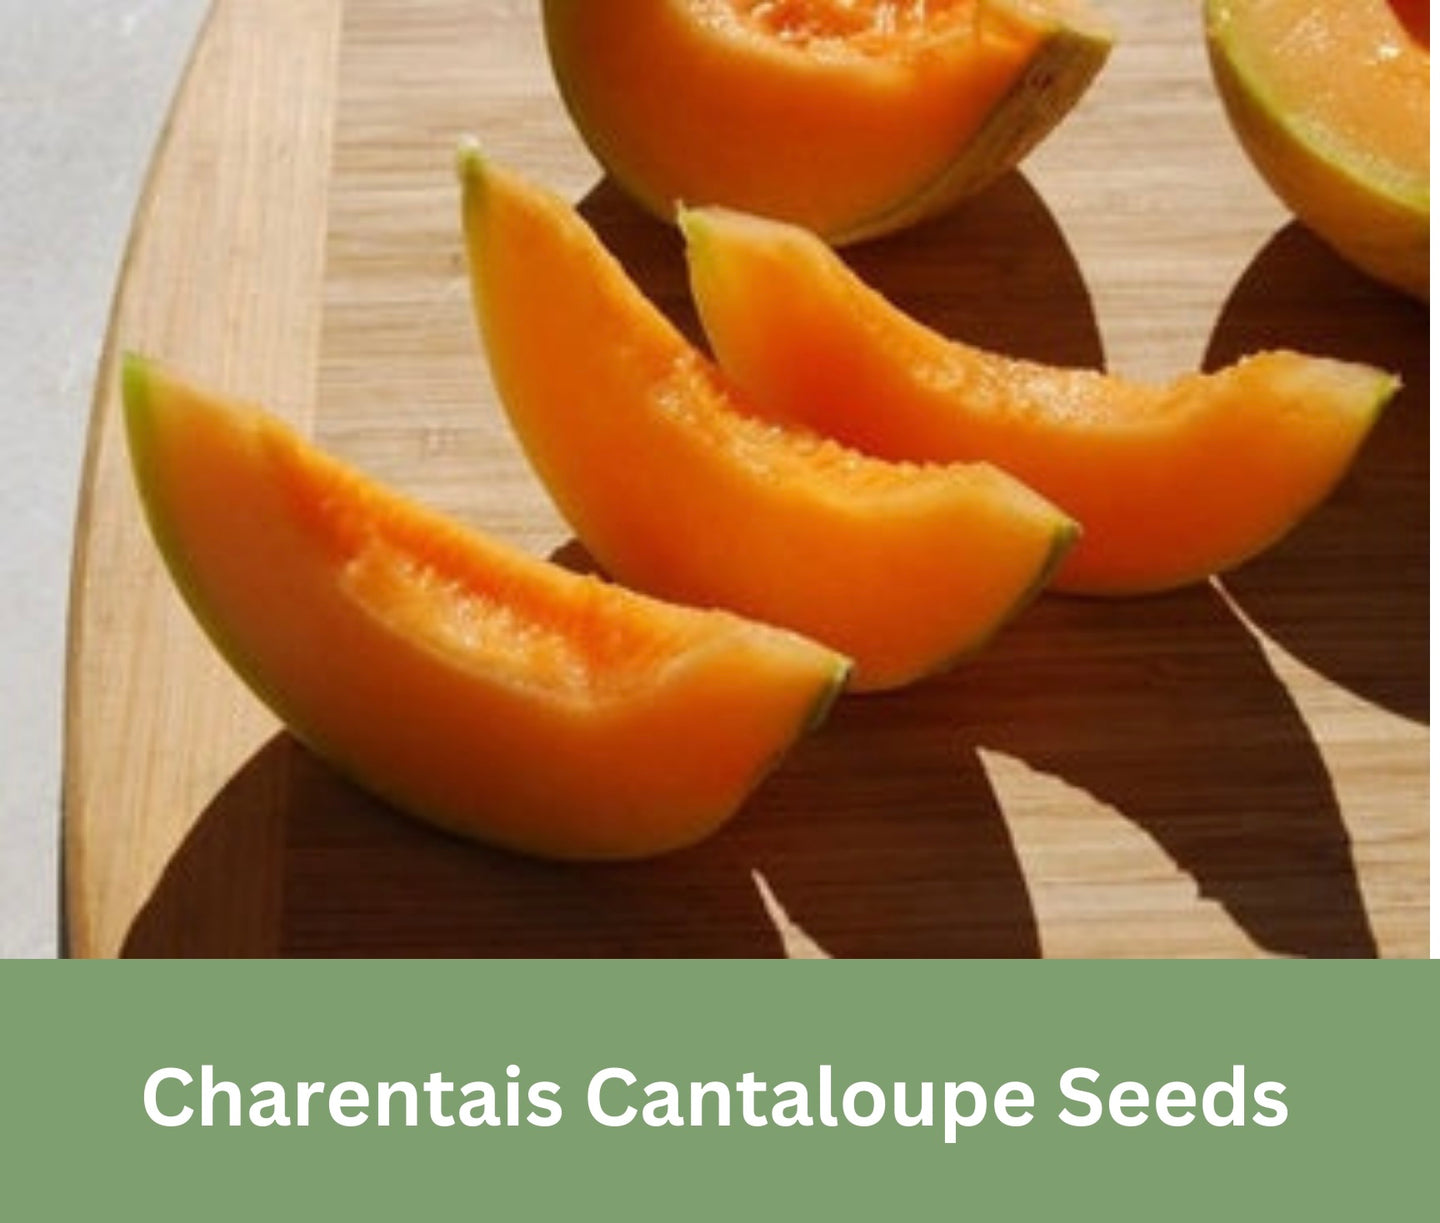 Heirloom Charentais Cantaloupe Seeds, Rare Heirloom, Organic, Non Gmo, One of the Sweetest Melons